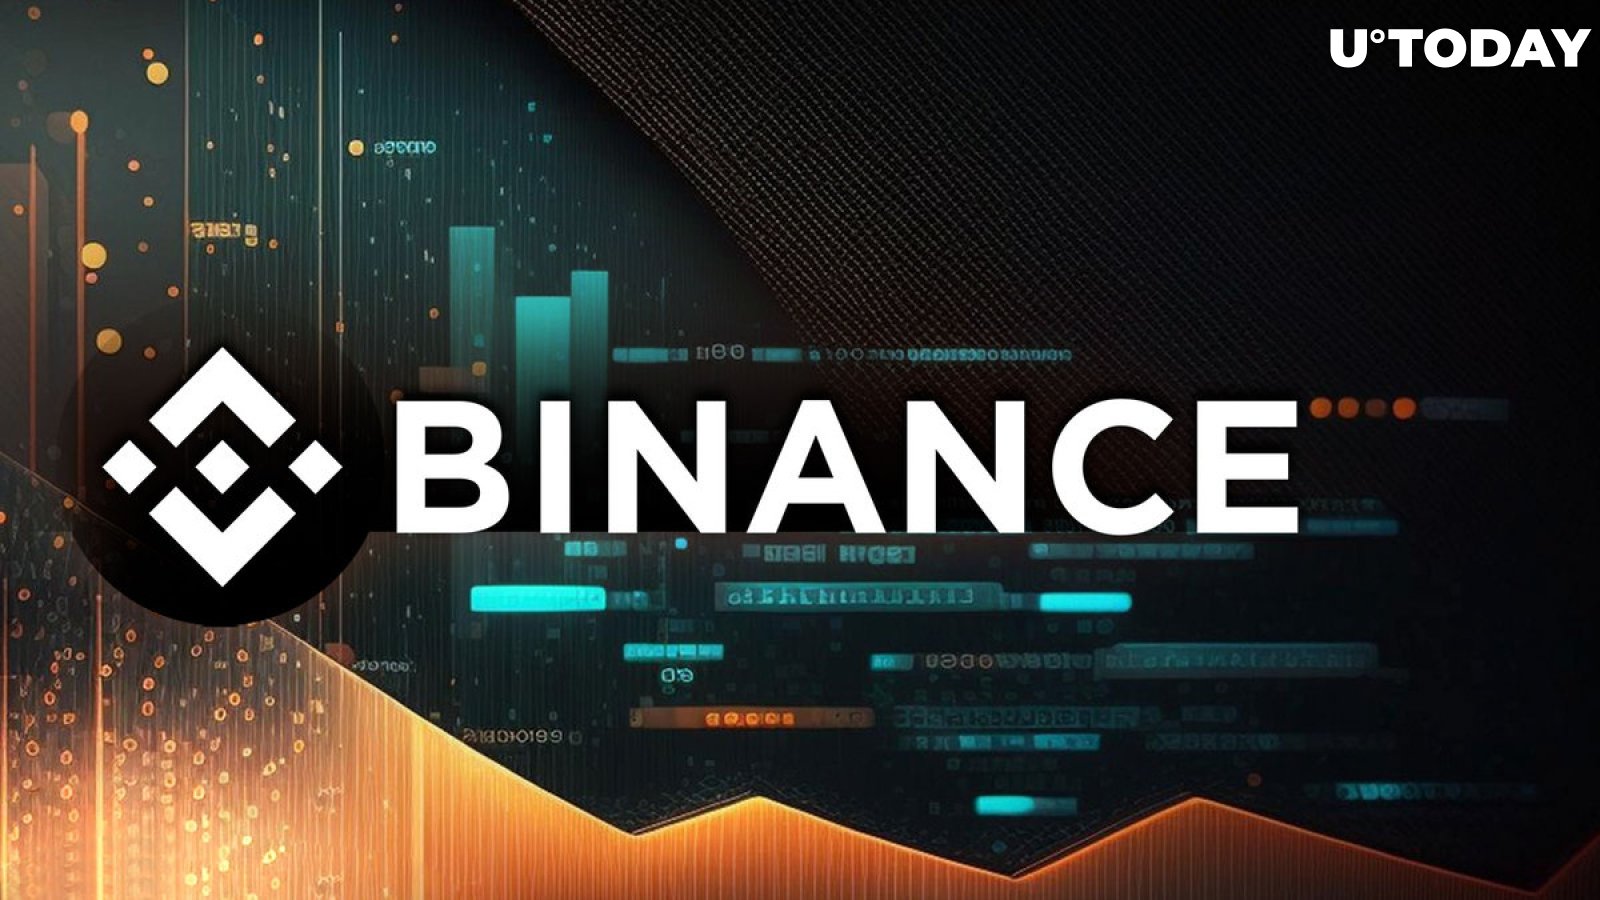 Binance to Delist 6 Large Trading Pairs: Details